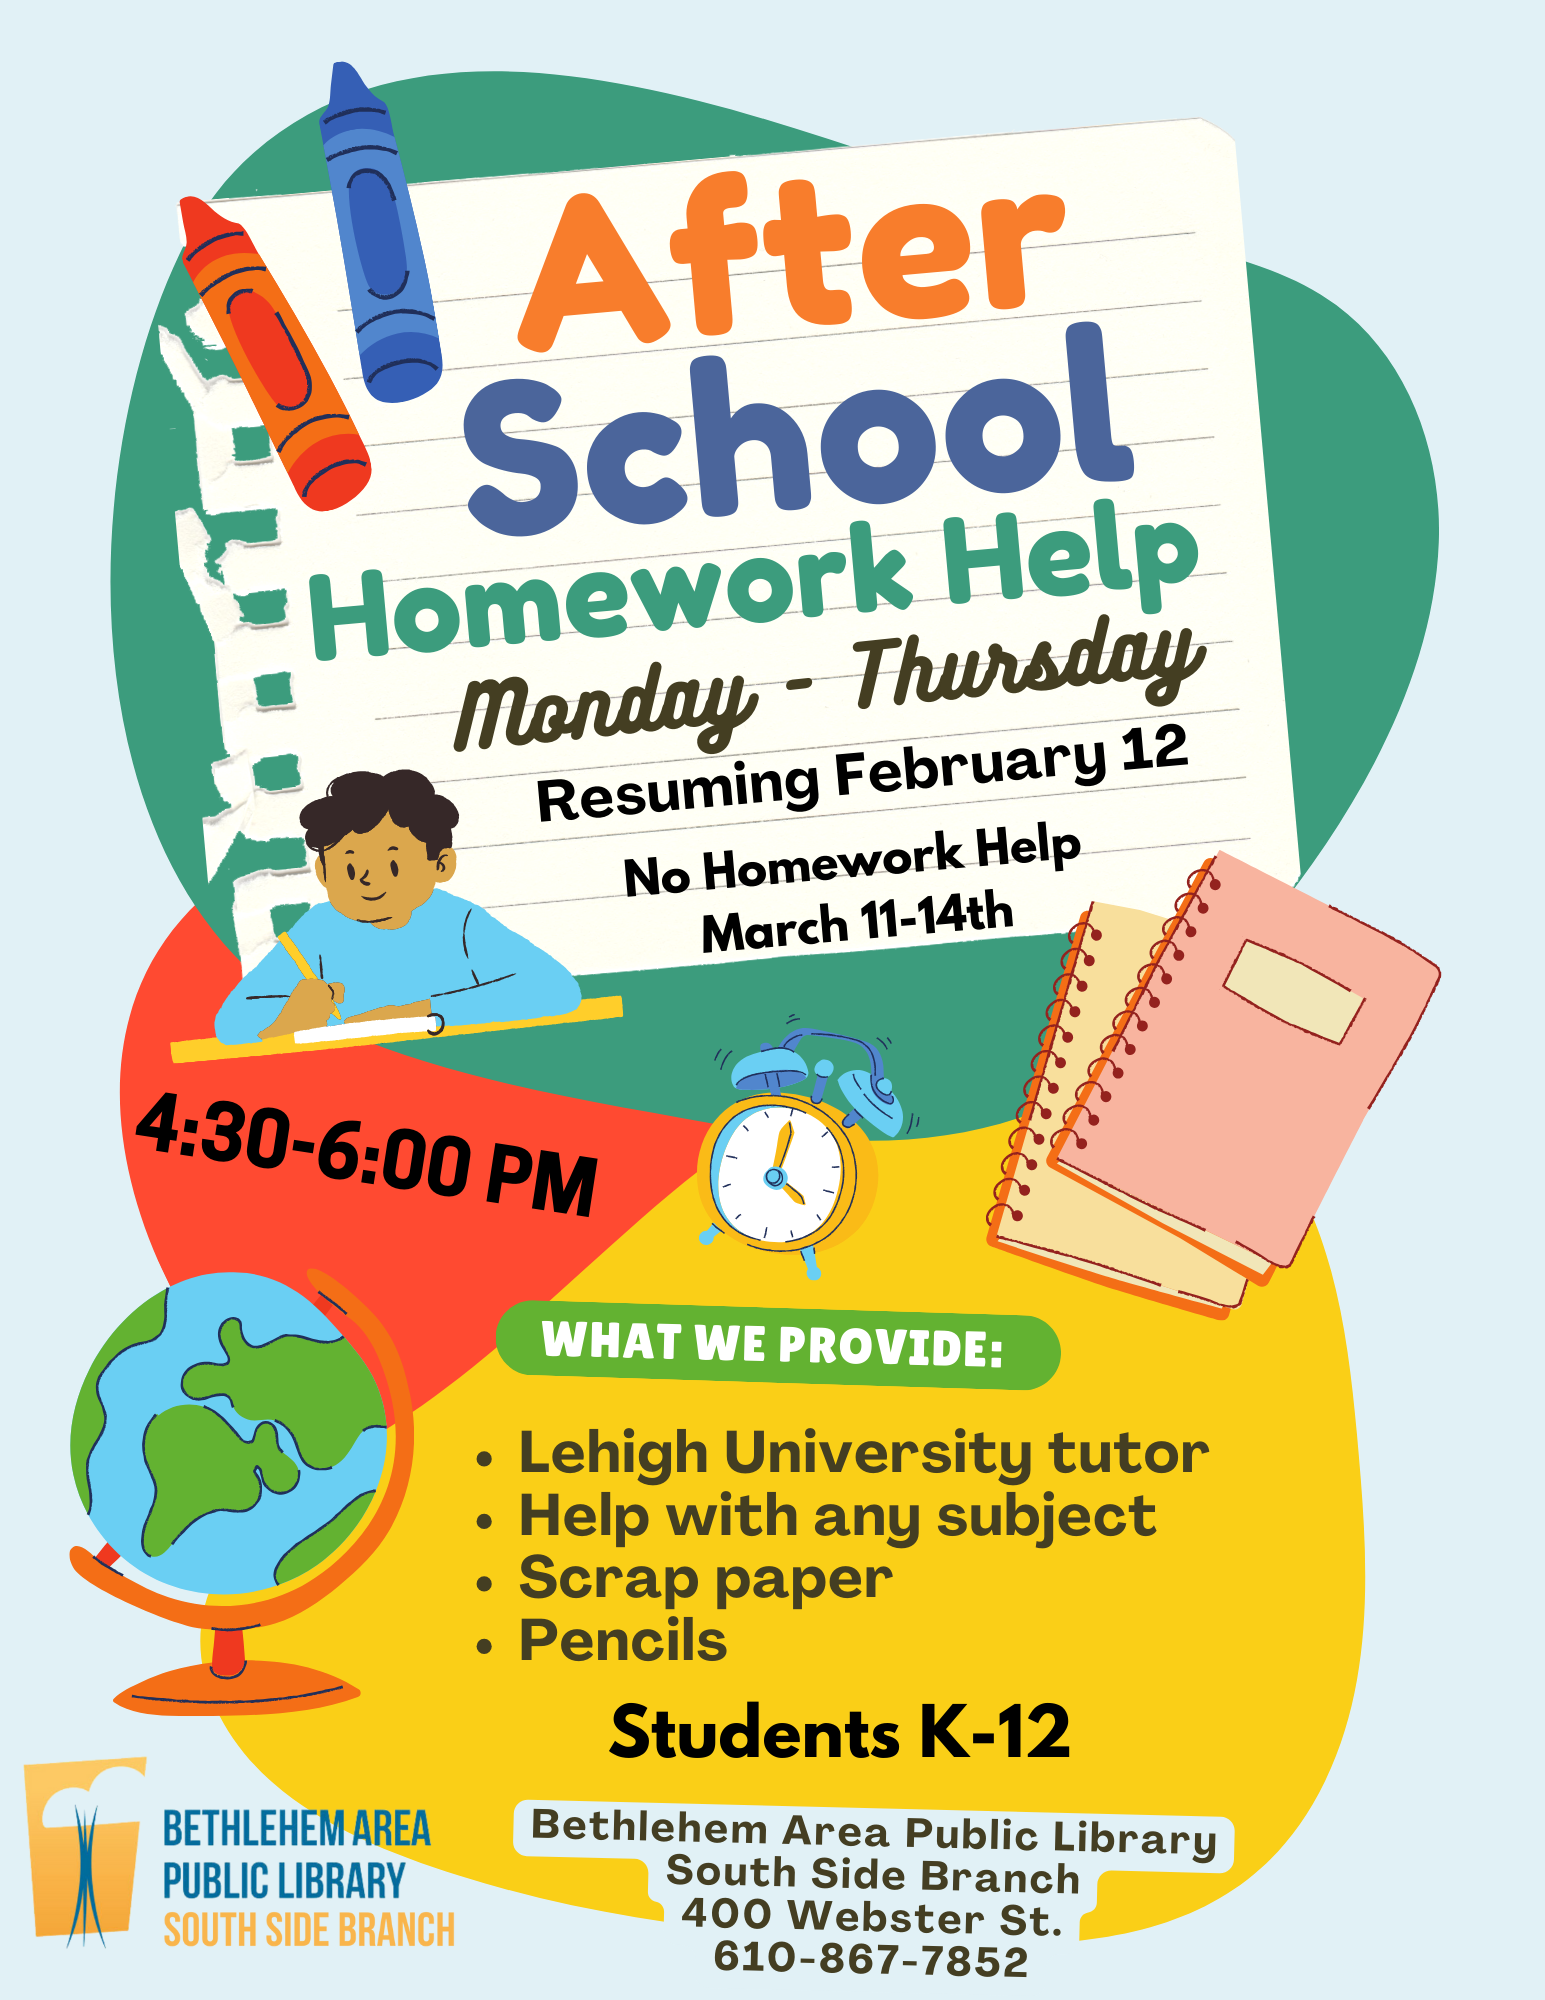 After School Homework Help, Monday-Thursday, Resuming February 12, No Homework Help March 11-14, 4:30-6 pm, What we provide: Lehigh University Tutor, help with any subject, pencils, scrap paper, students K-12